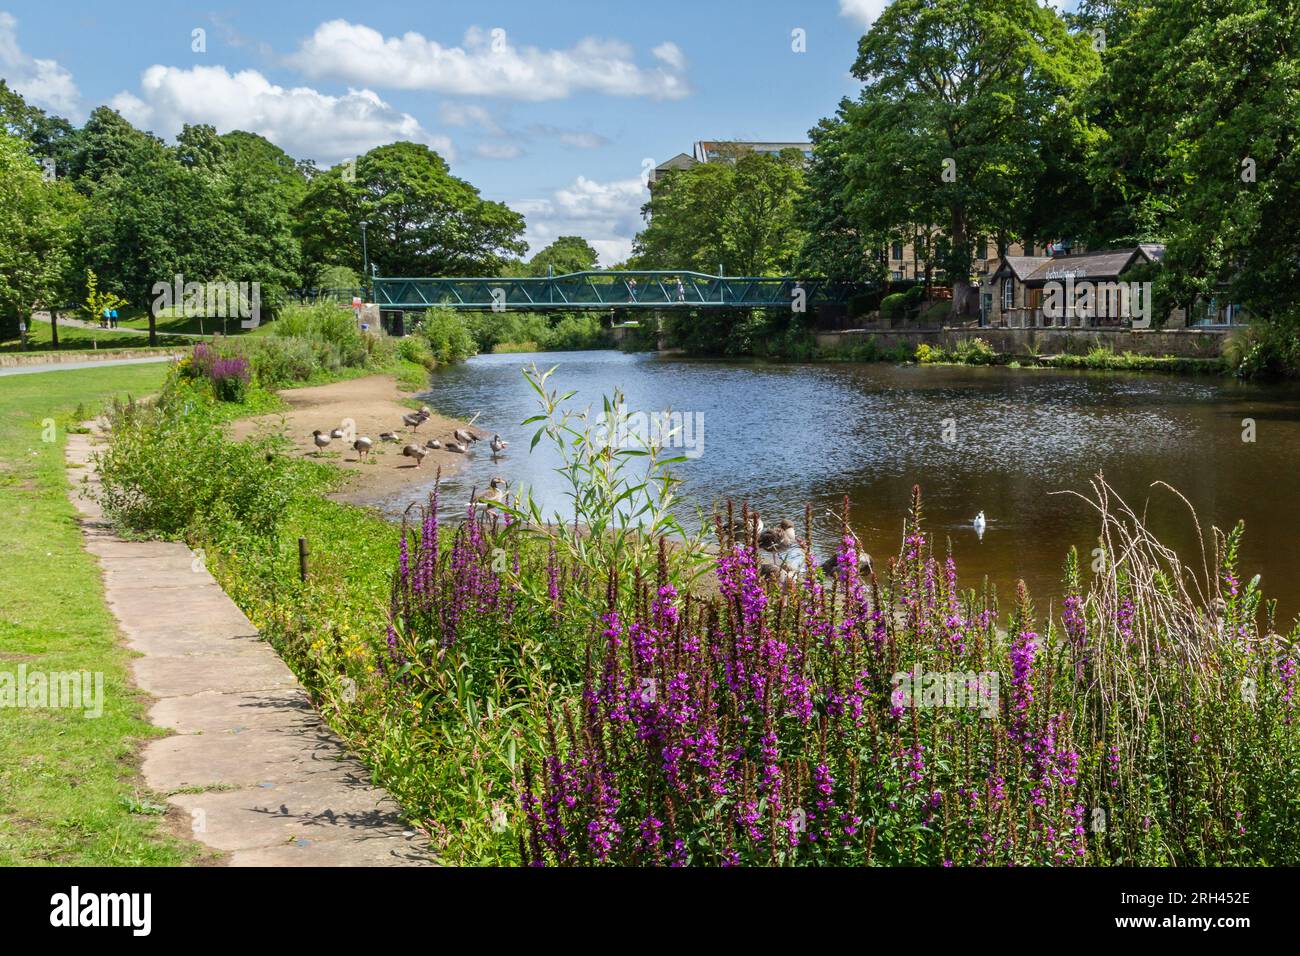 The River Aire at Saltaire, Yorkshire. The river runs between Roberts Park and the historical village of Saltaire (a UNESCO World Heritage Site). Stock Photo